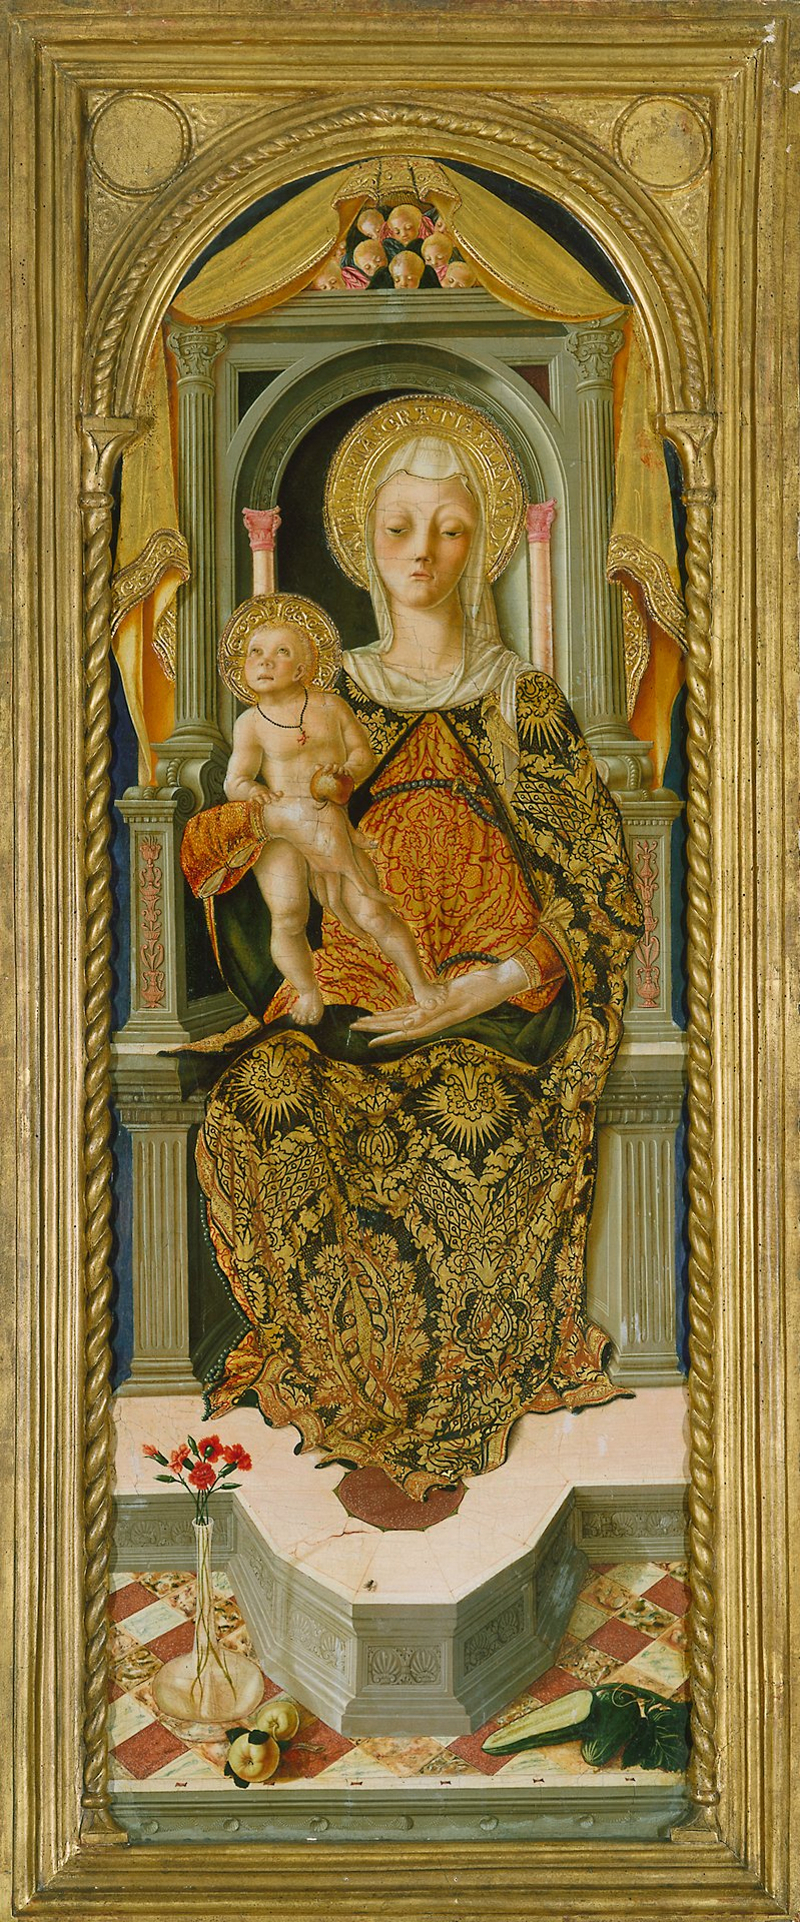 Arched top. The Madonna, in a gold and blue mantle over a red and gold brocade robe, seated on a throne in Renaissance style holding the infant Christ who stands on her knee, an apple in his hand; at the foot of the throne, pinks in a vase, apples, and marrows.